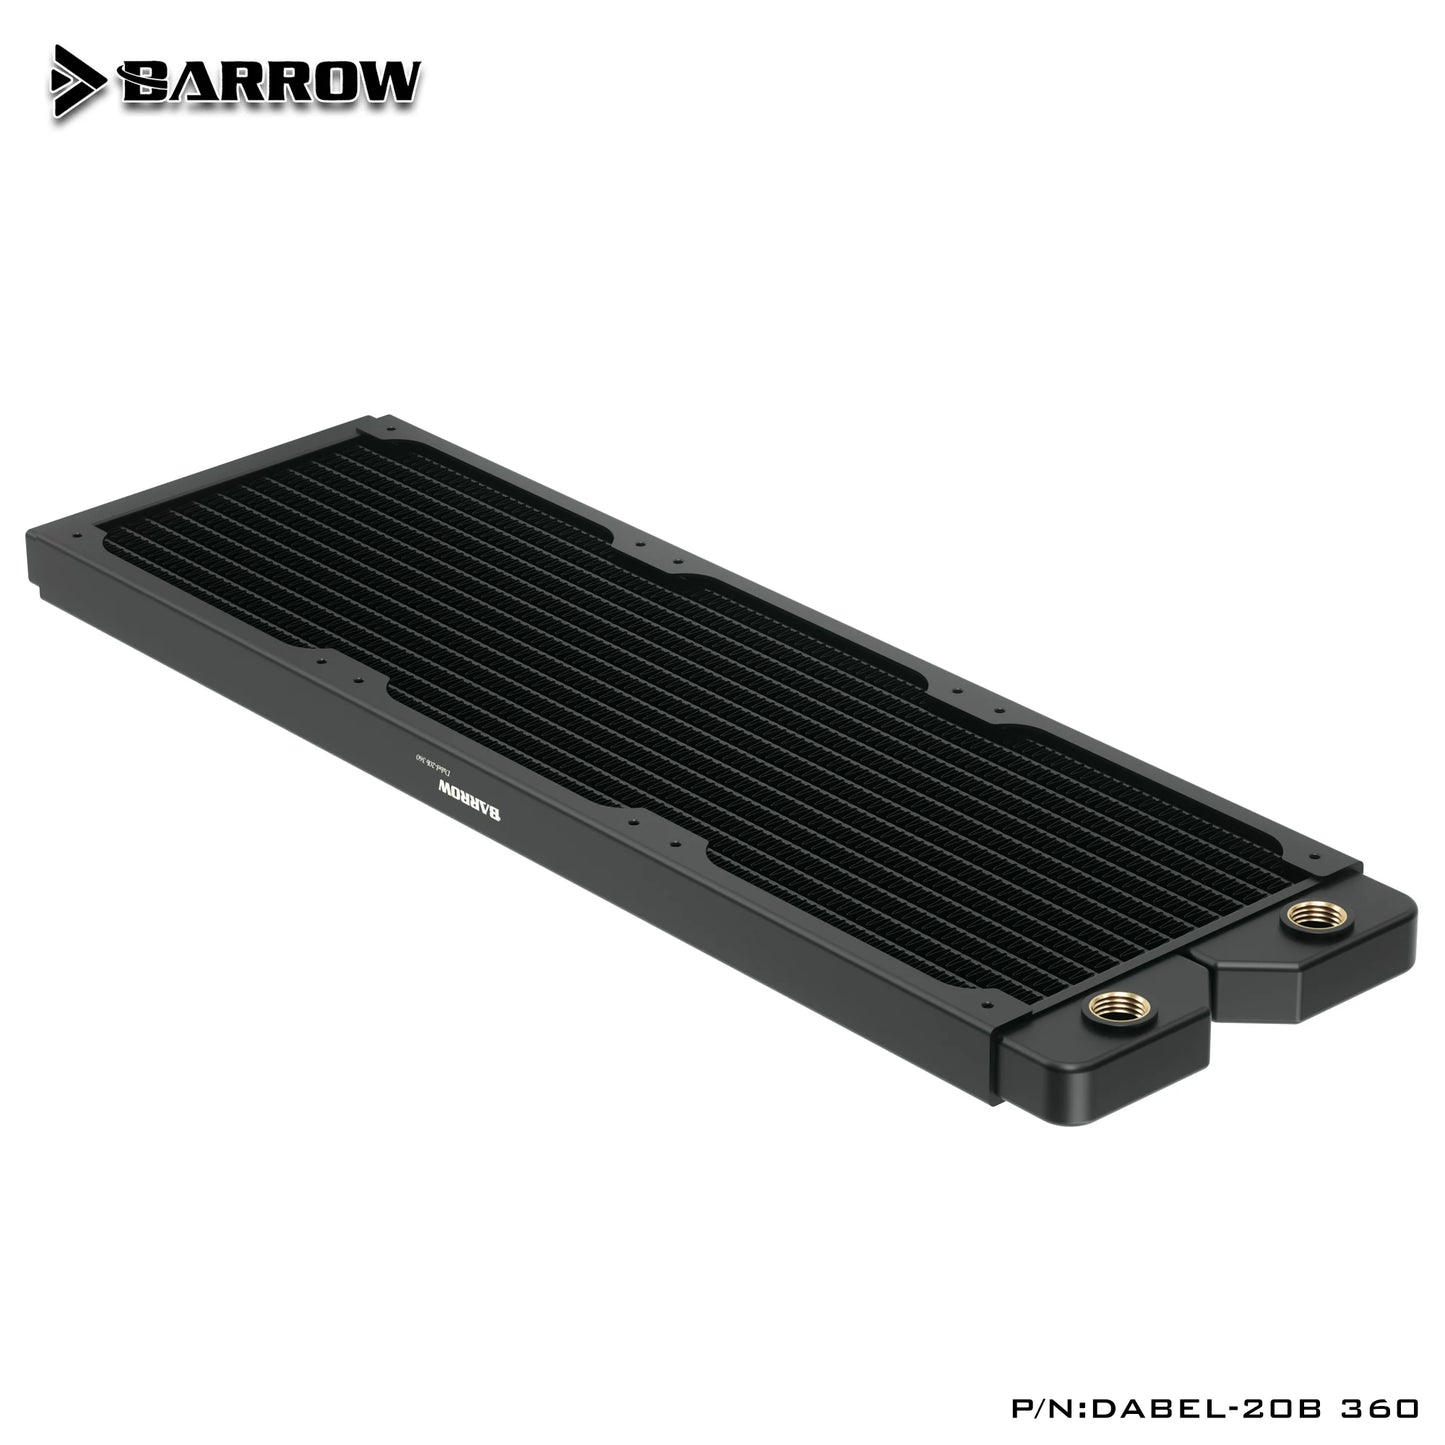 Barrow Radiator 20mm Thick Copper G1/4" Thread For 12cm Fan 240/360MM PC Radiator Water Cooling Dabel-20a Dabel-20b